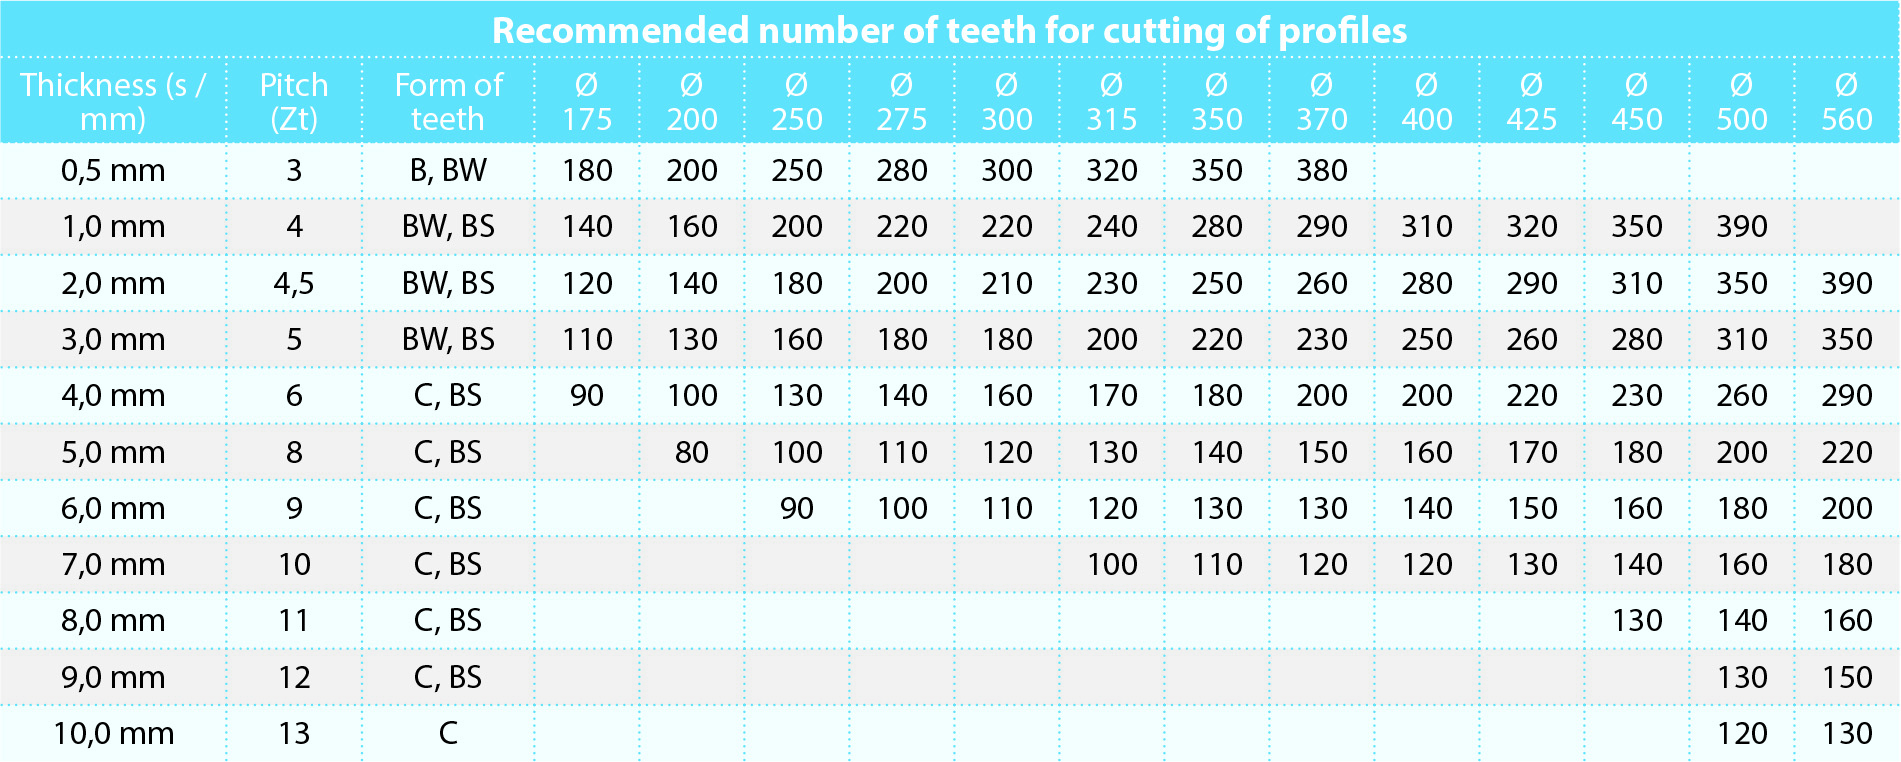 Teeth number + Toof form we recommend for cutting profiles and pipes